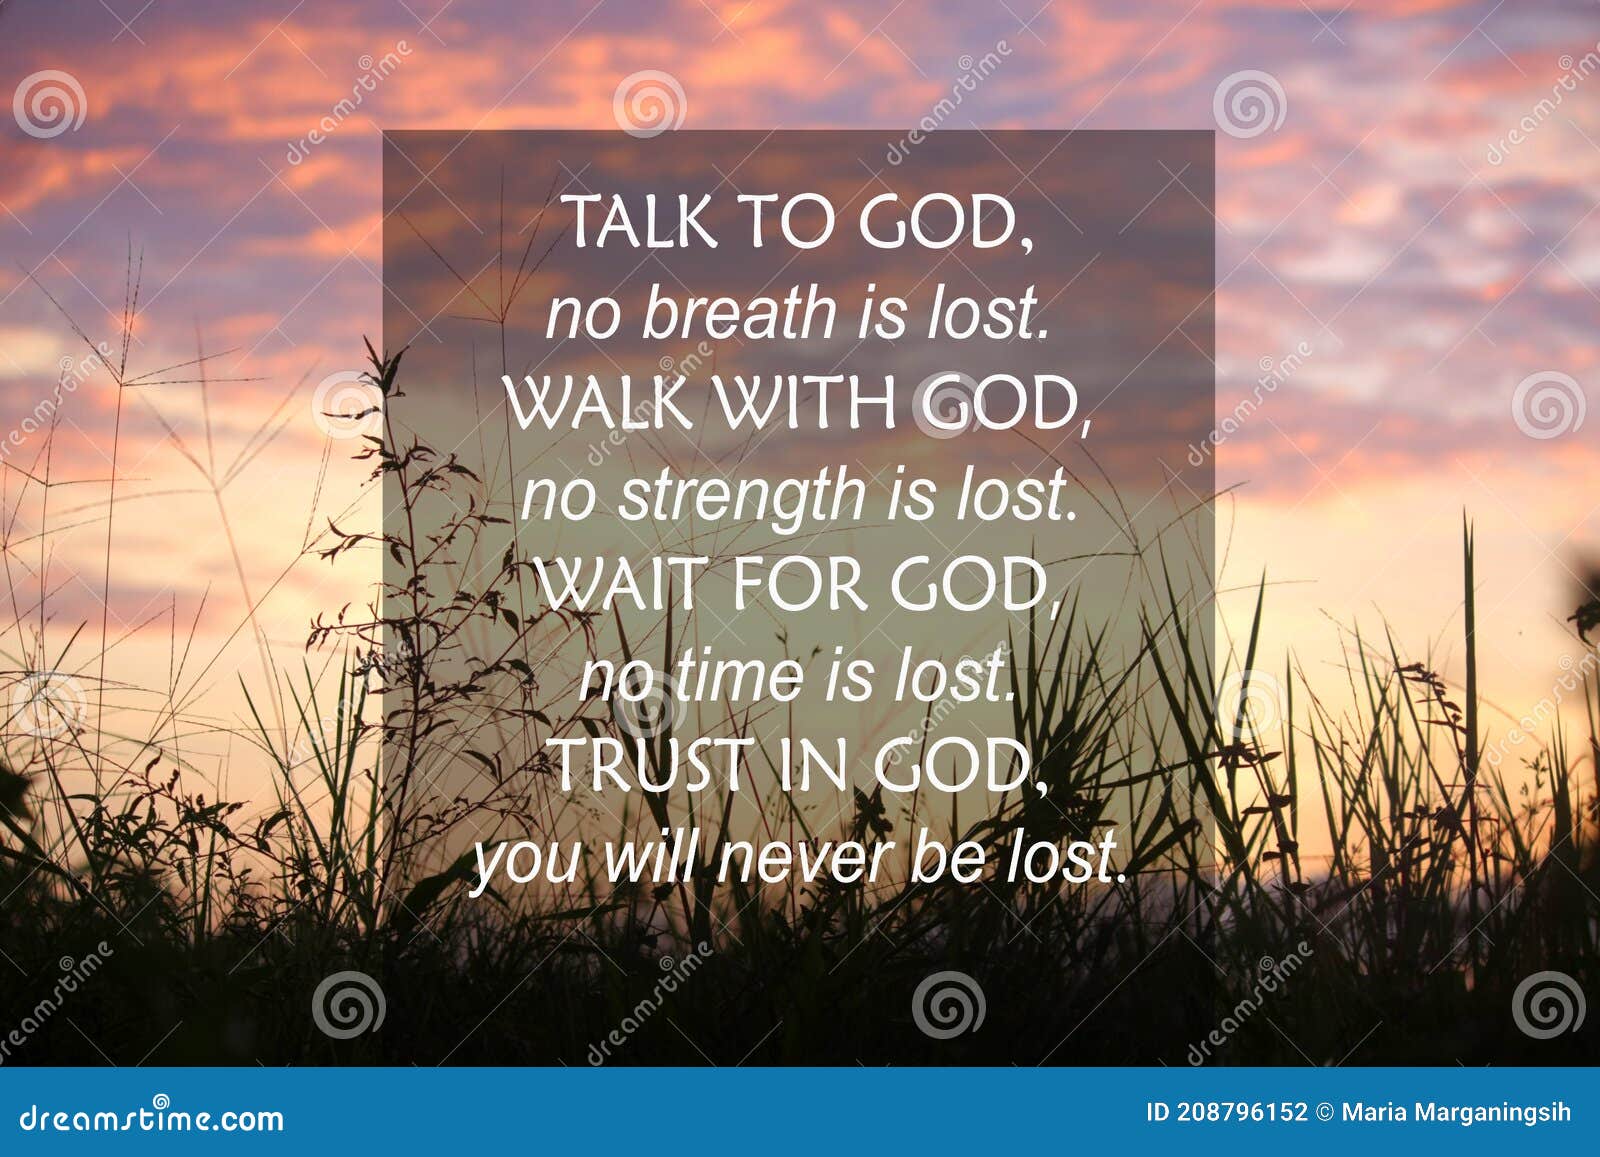 talk to god  no breath is lost. walk with god  no strength is lost. wait for god  no time is lost. trust in god concept.